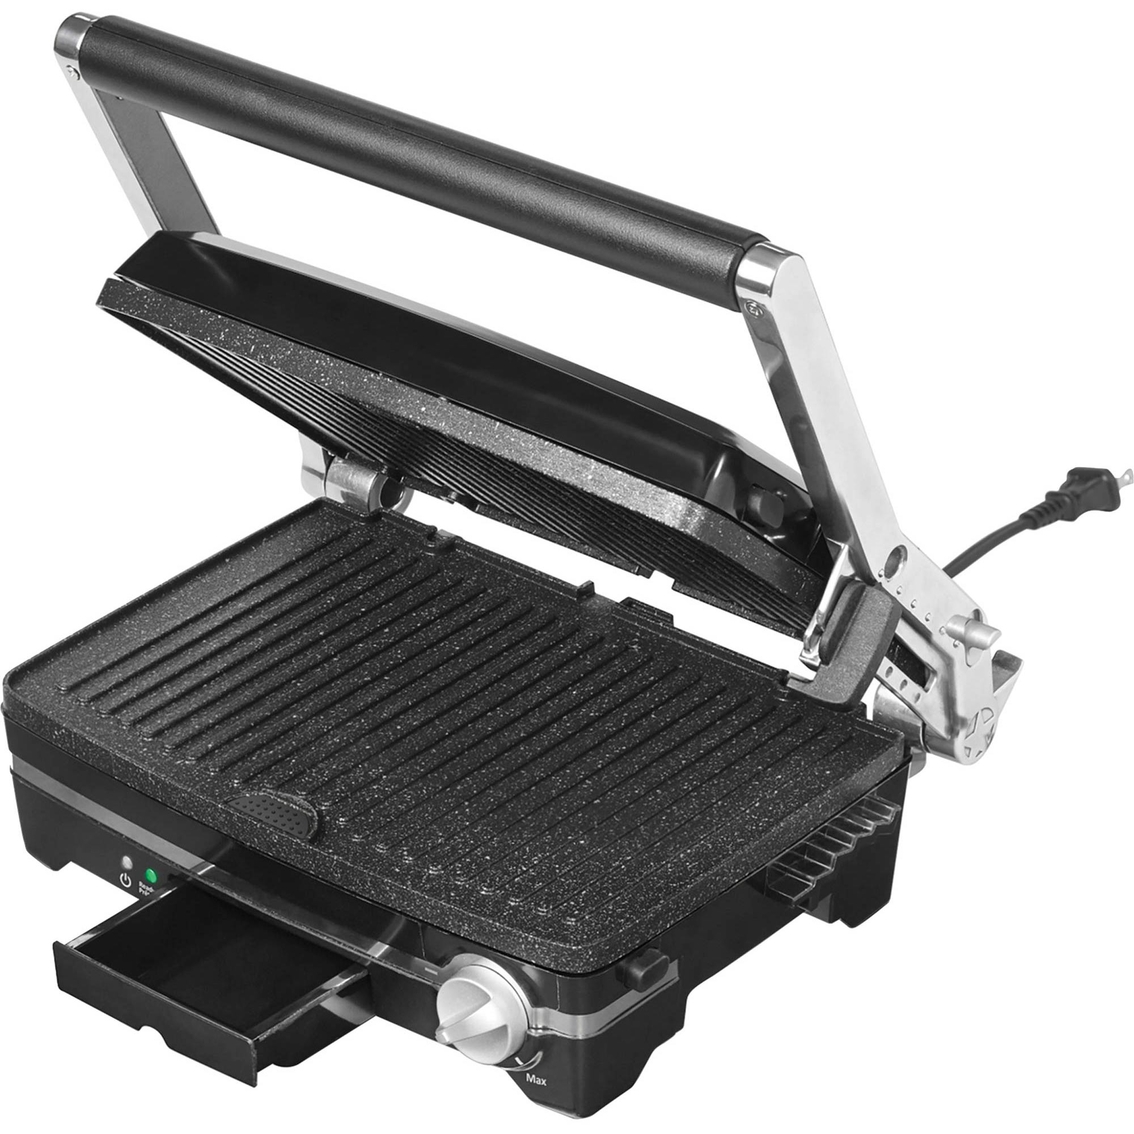 Starfrit The Rock 1,500W Panini Maker with Reversible Plates - Image 2 of 6